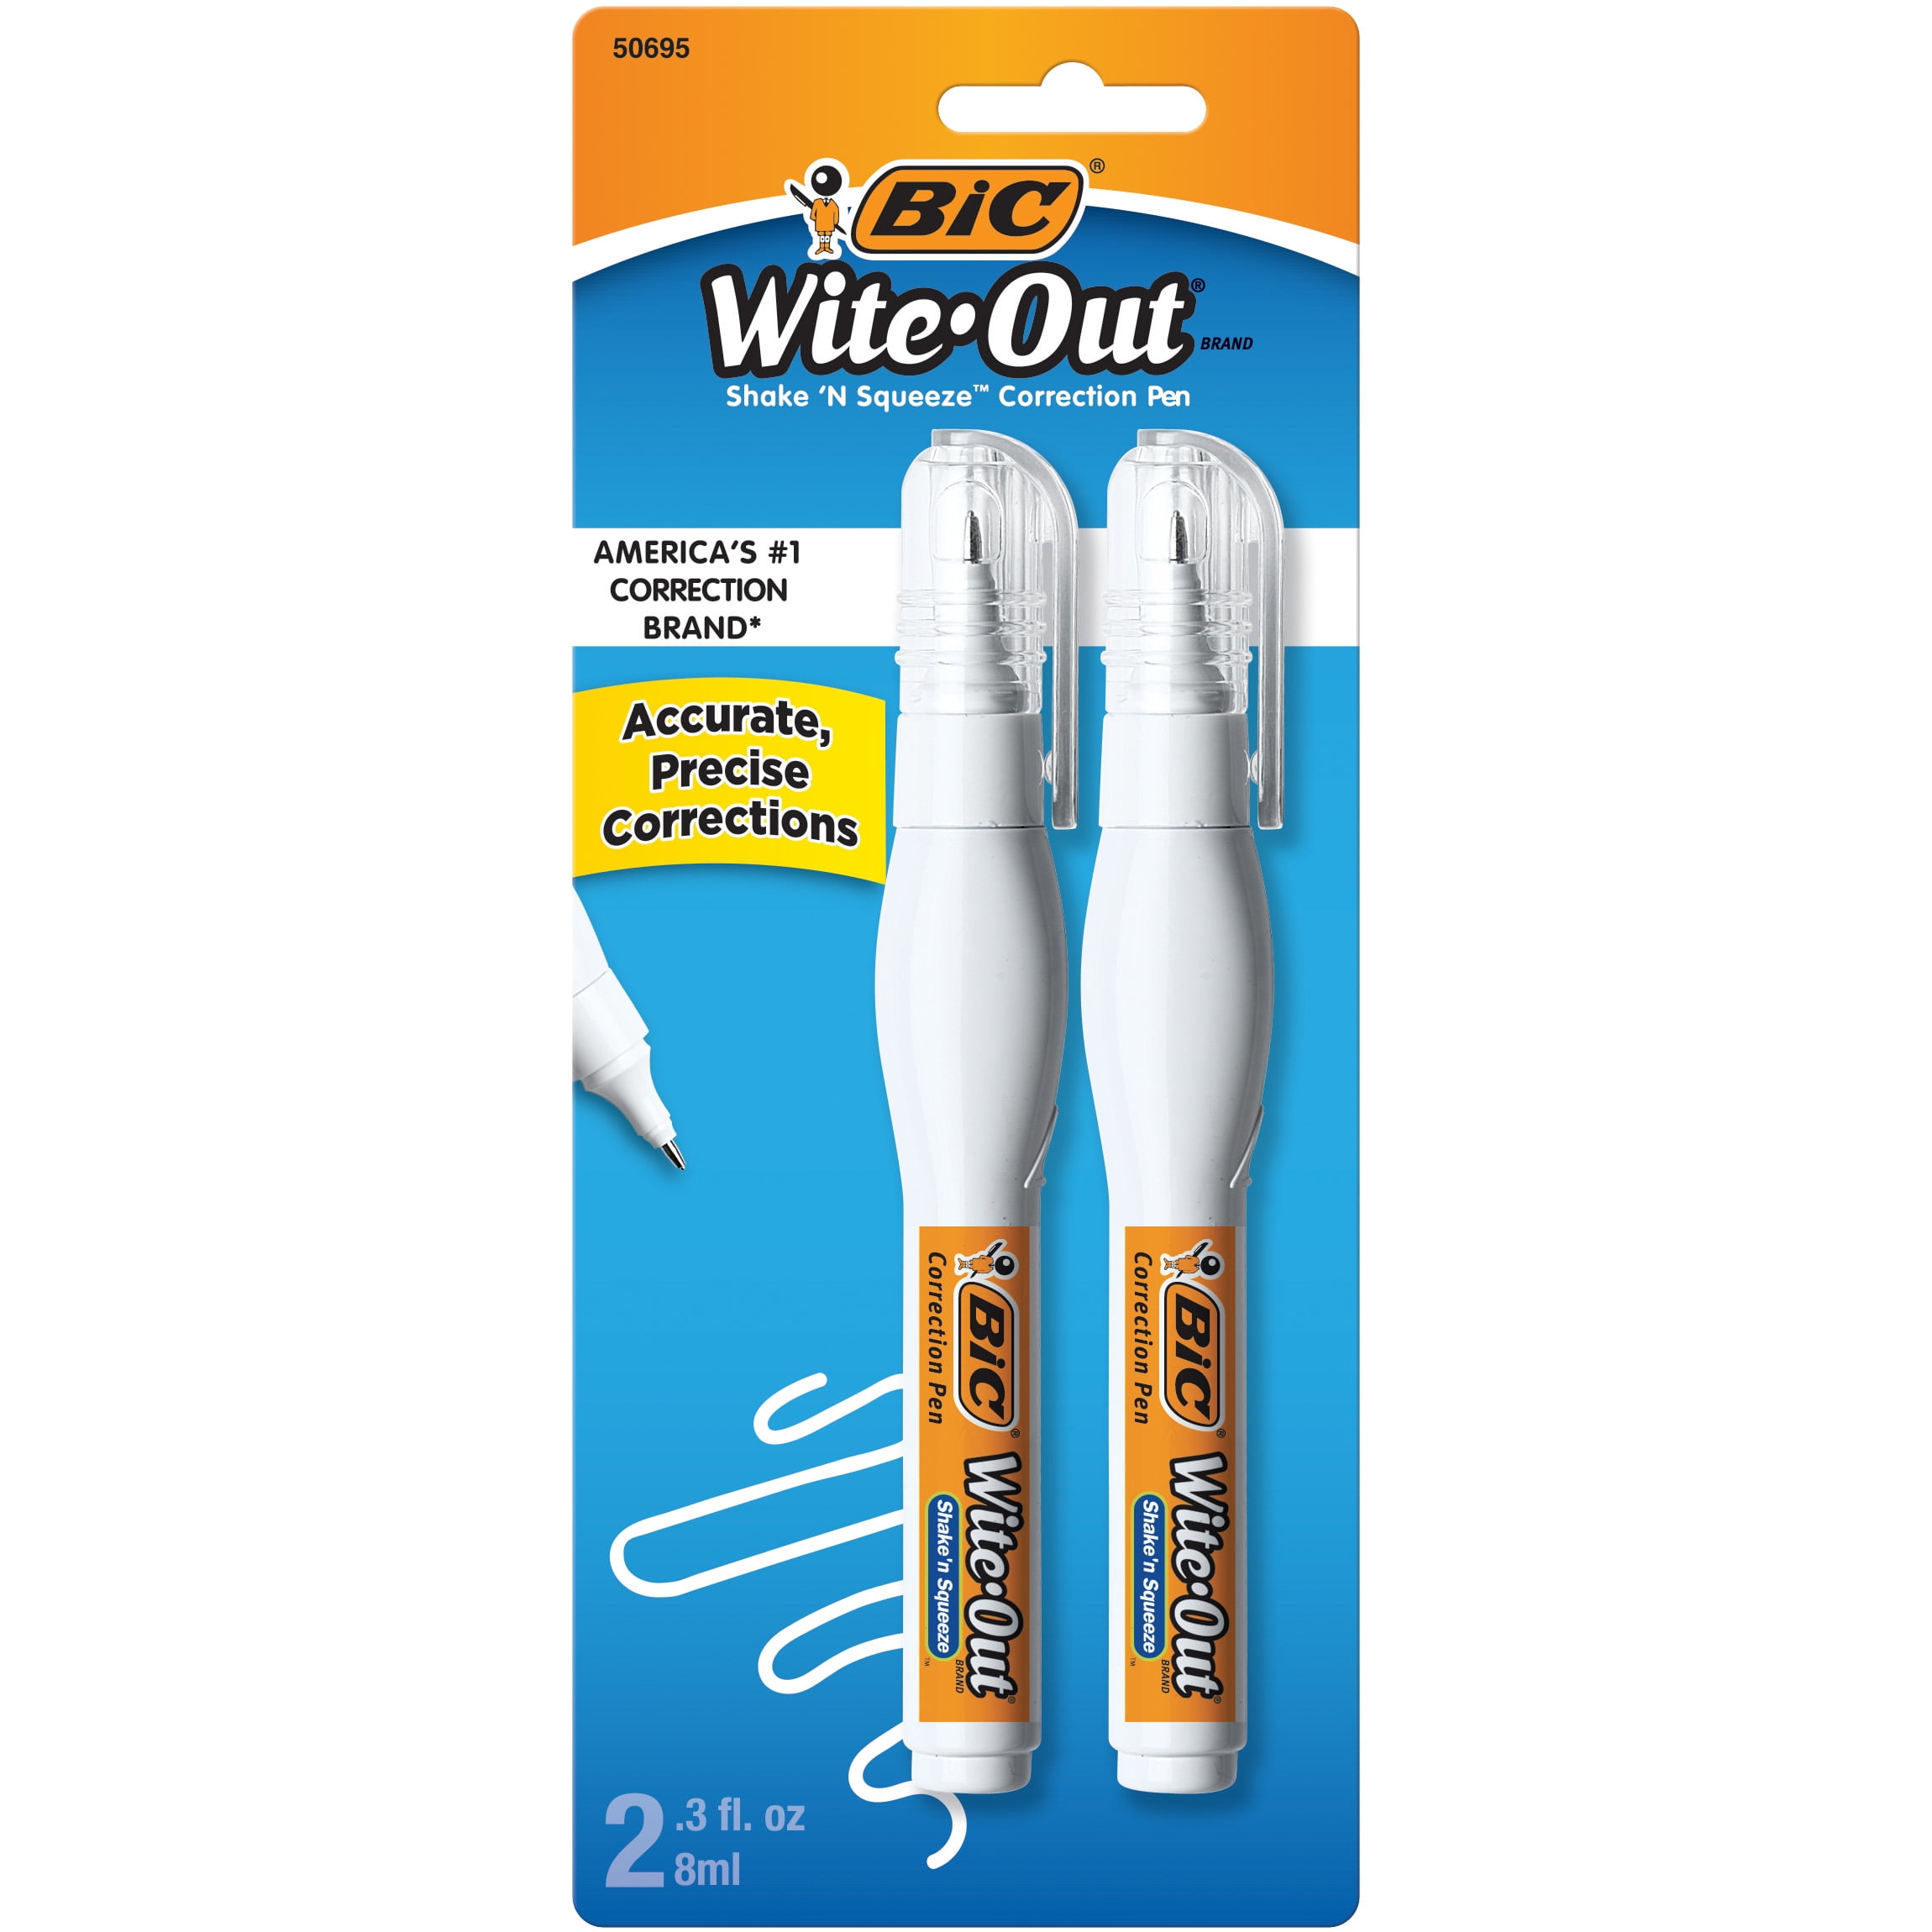 Enday Liquid Paper White Out Pen 7 ml Correction Fluid Ink Eraser, 12 Pack  